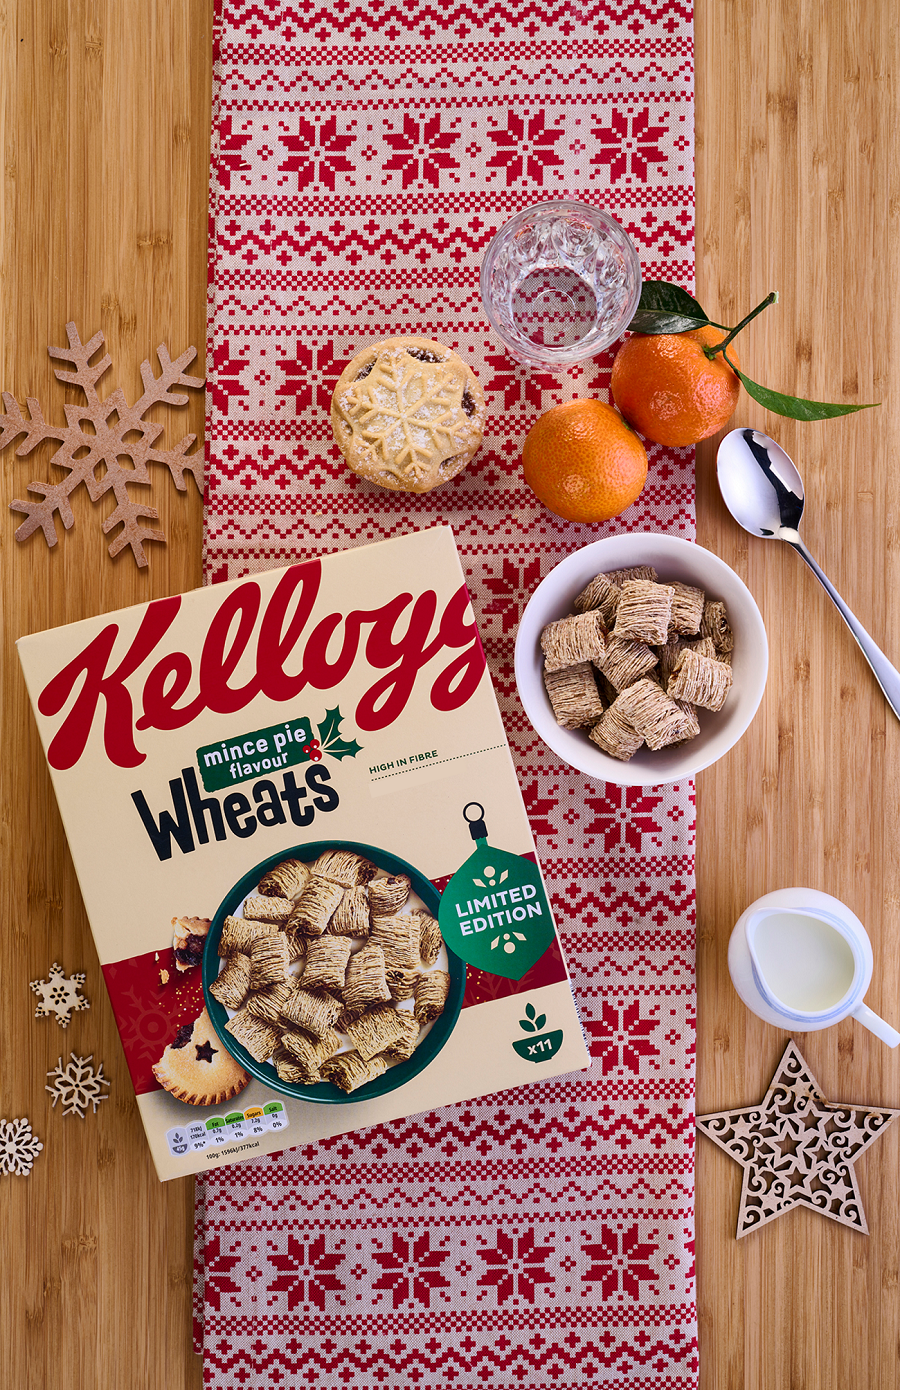 Kellogg's launches Chocolate Flavour Corn Flakes